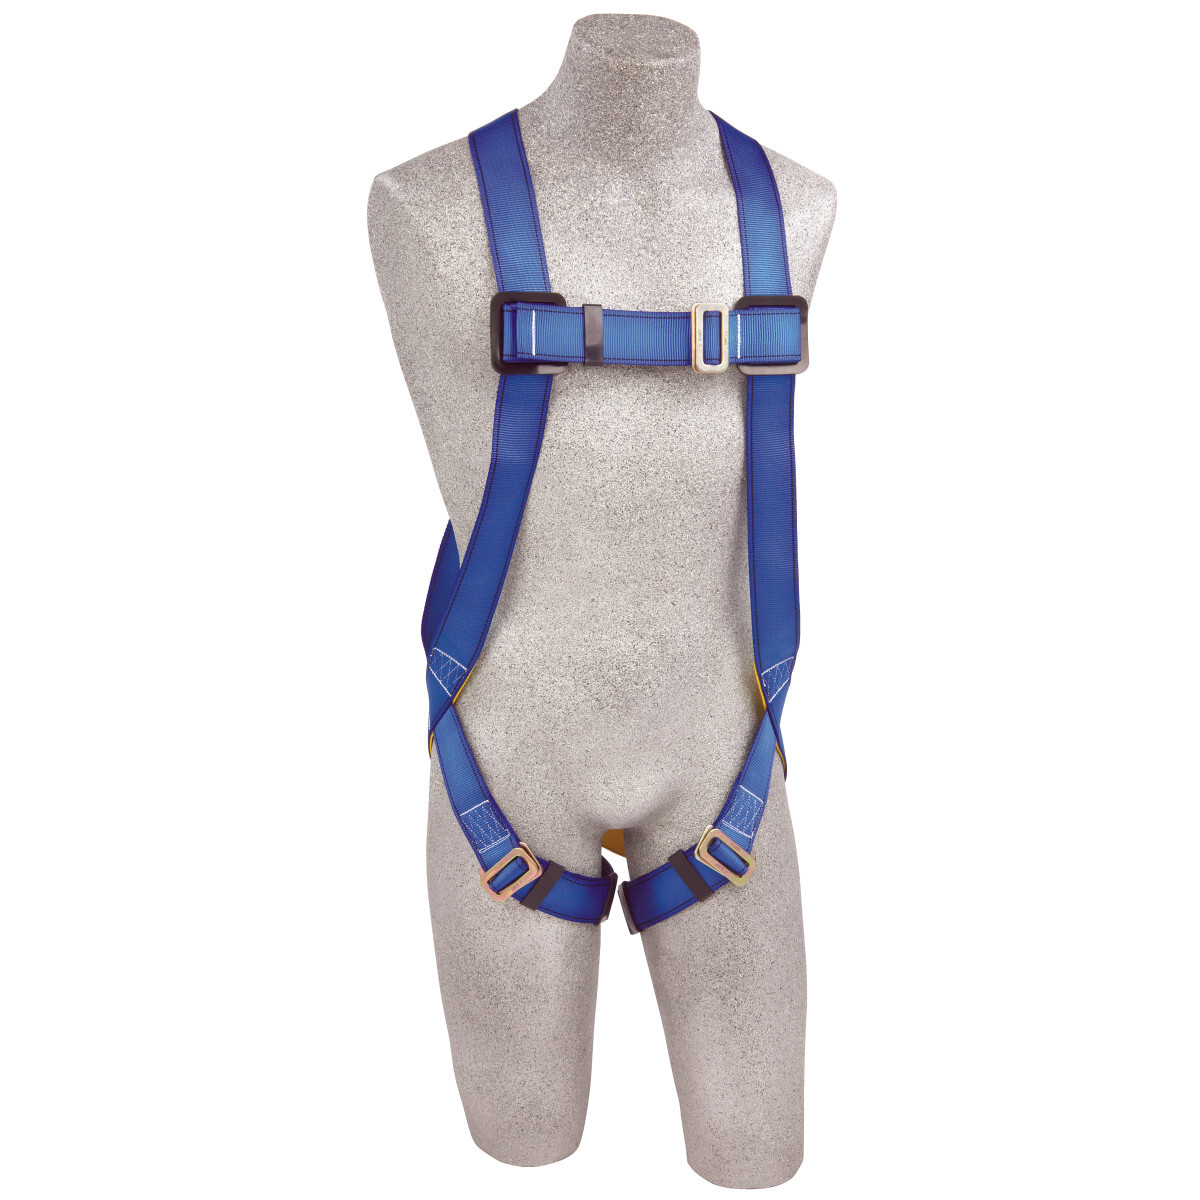 3M™ DBI-SALA® 2X PROTECTA® FIRST™ Full Body/Vest Style Harness With Back D-Ring, Pass Thru Buckle Legs And Attached 6' AE57610 L